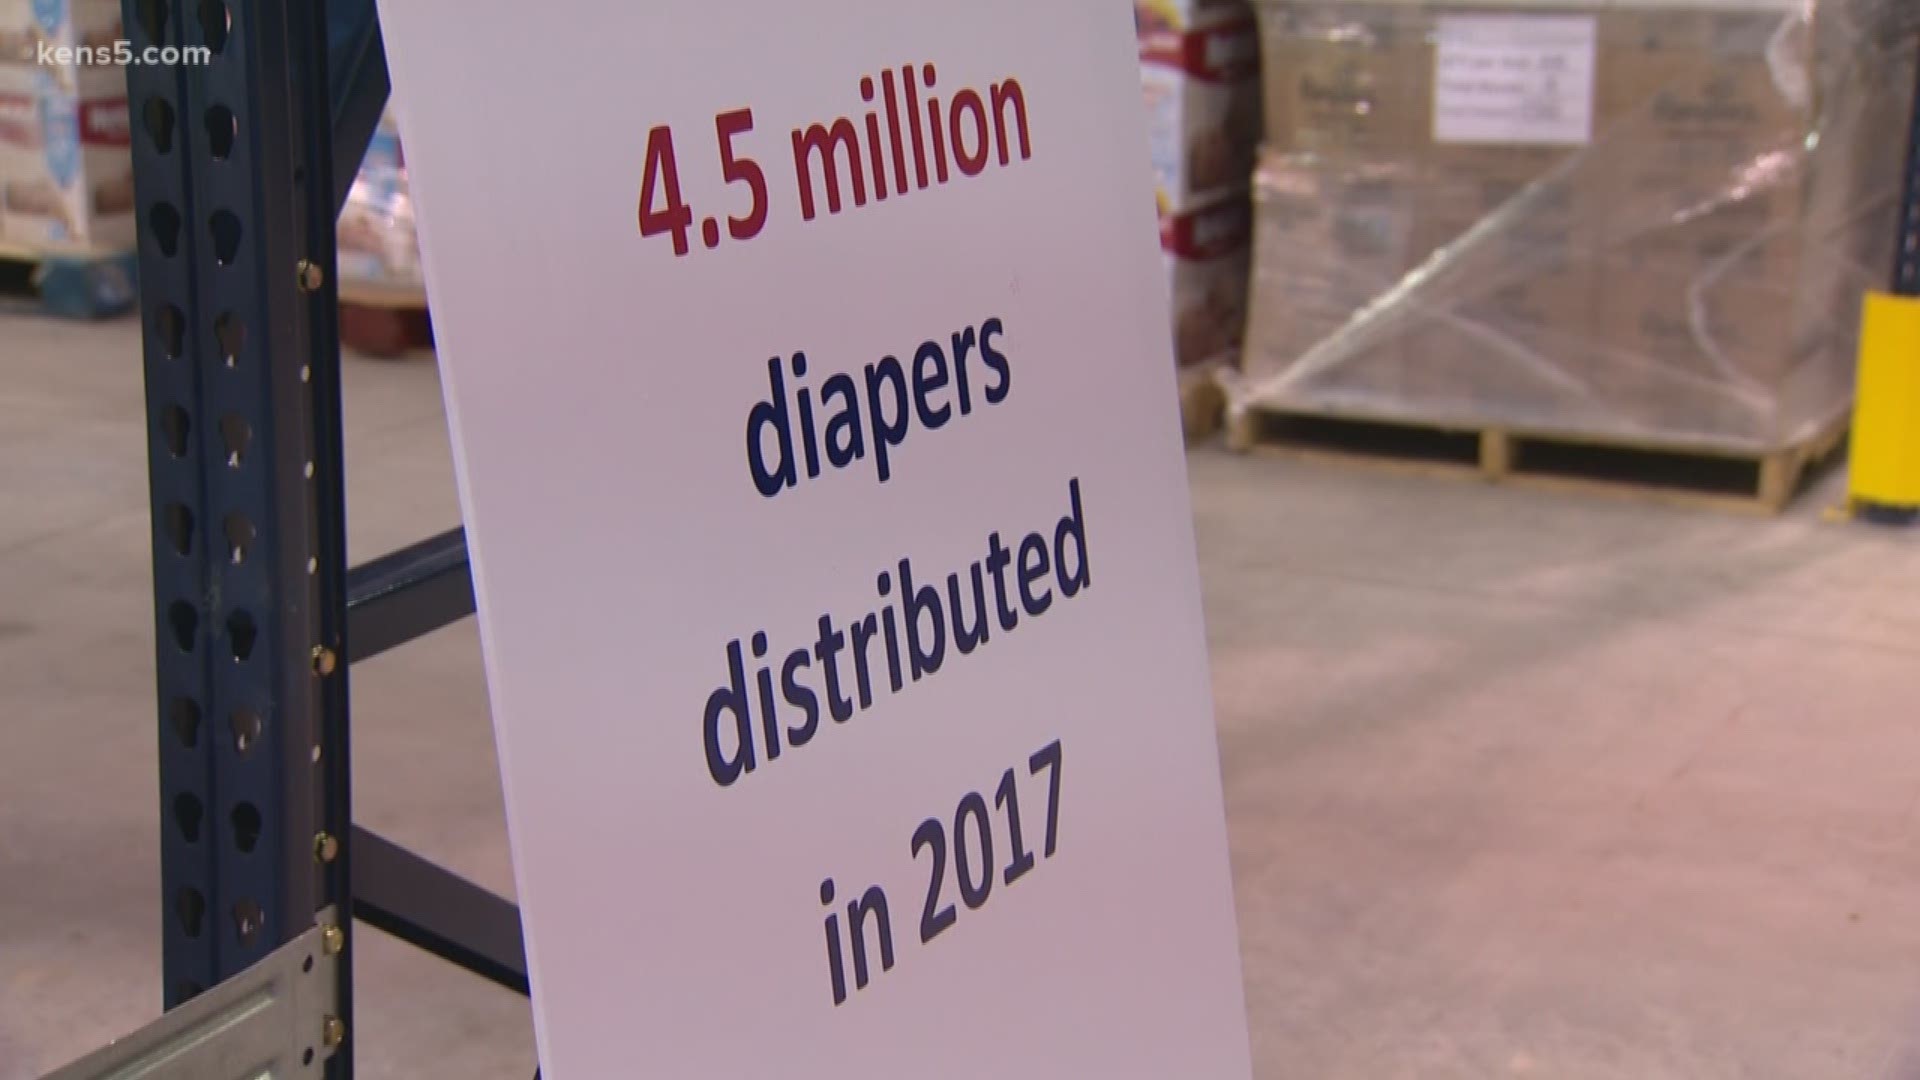 An organization that provides diapers to families in need is now able to offer even more help.